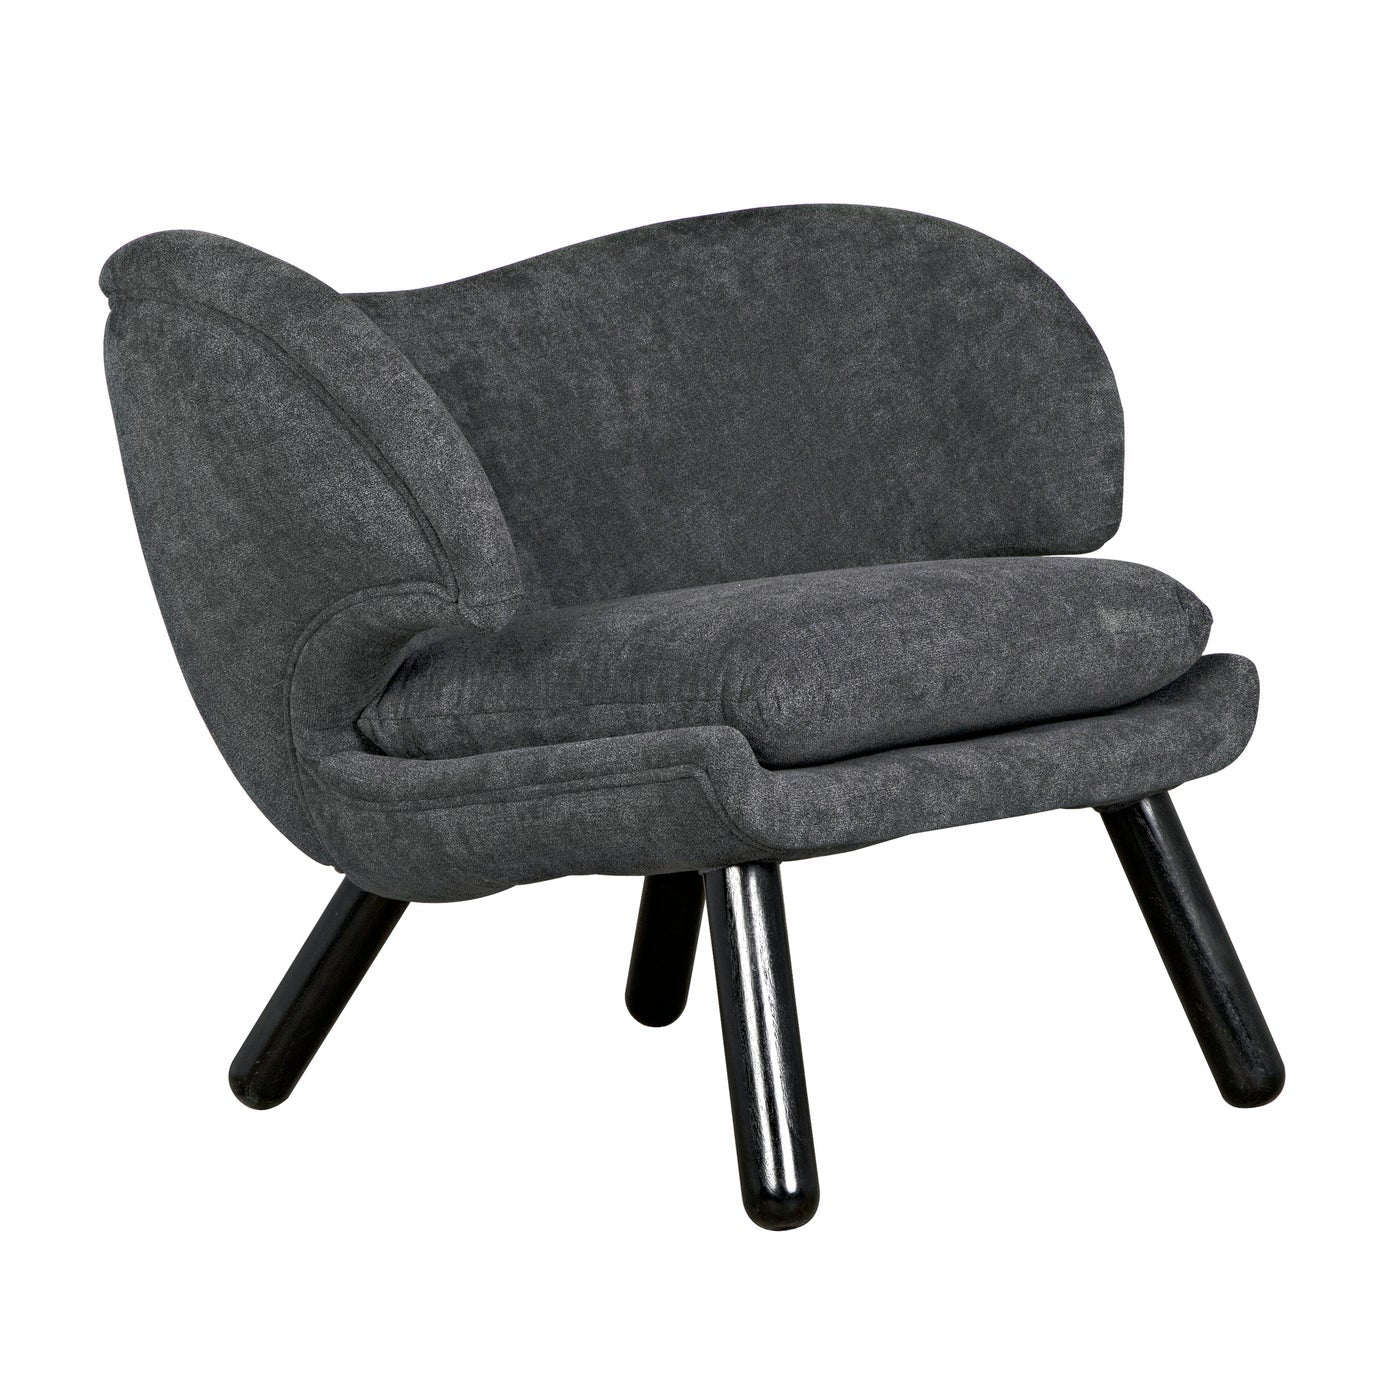 Valerie Chair with Grey Fabric